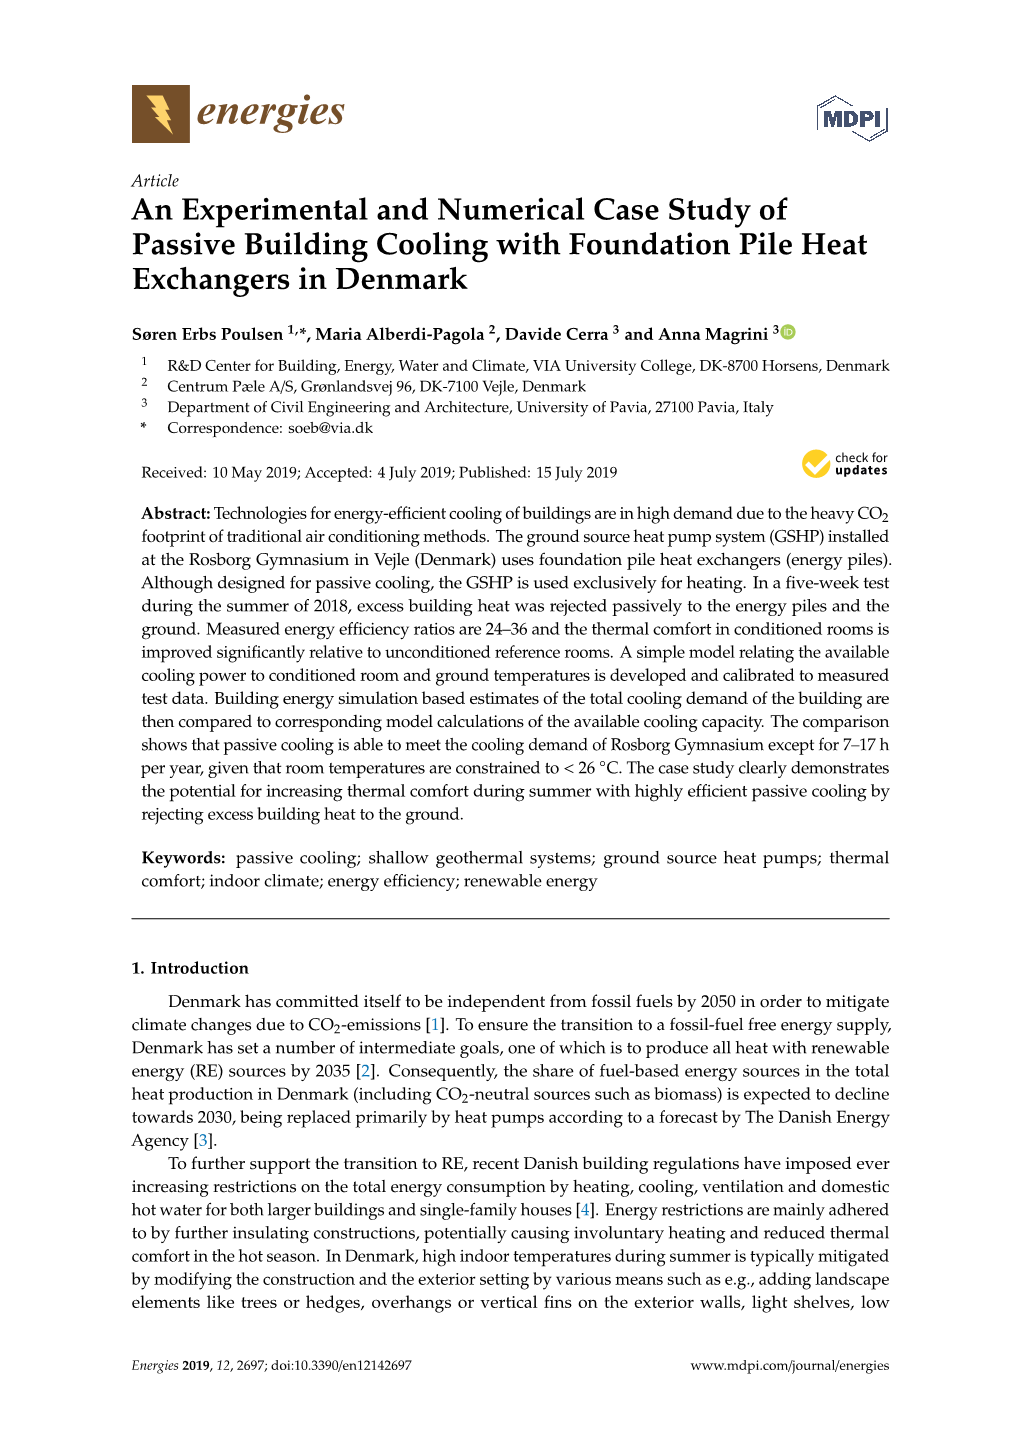 An Experimental and Numerical Case Study of Passive Building Cooling with Foundation Pile Heat Exchangers in Denmark